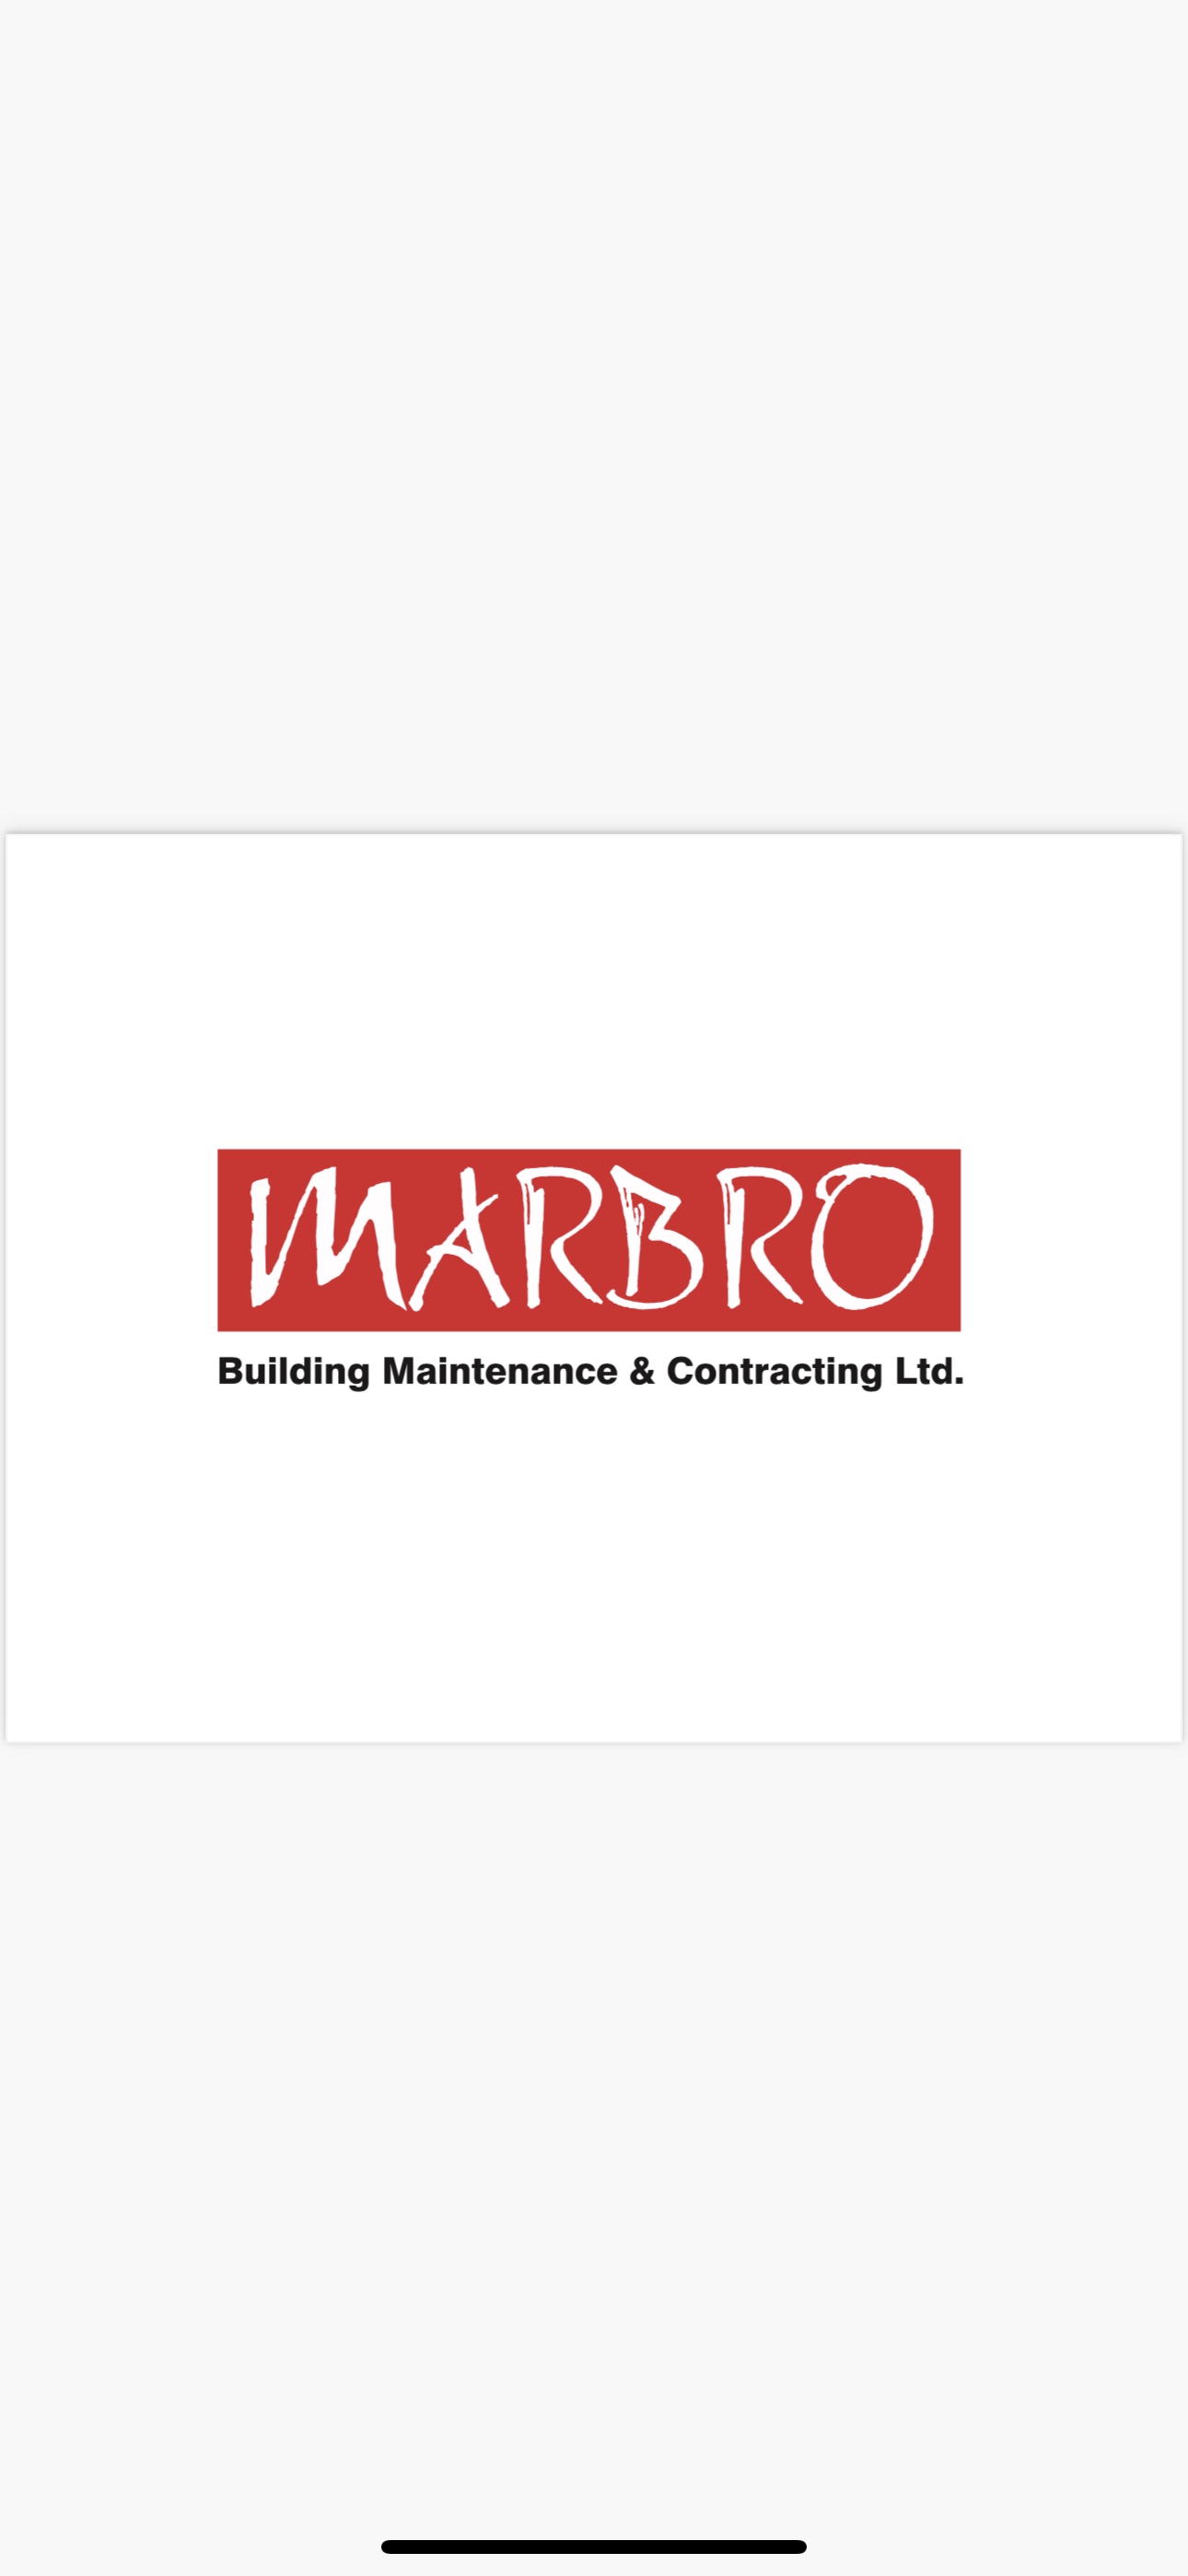 Marbro Building Maintenance and Contracting's logo